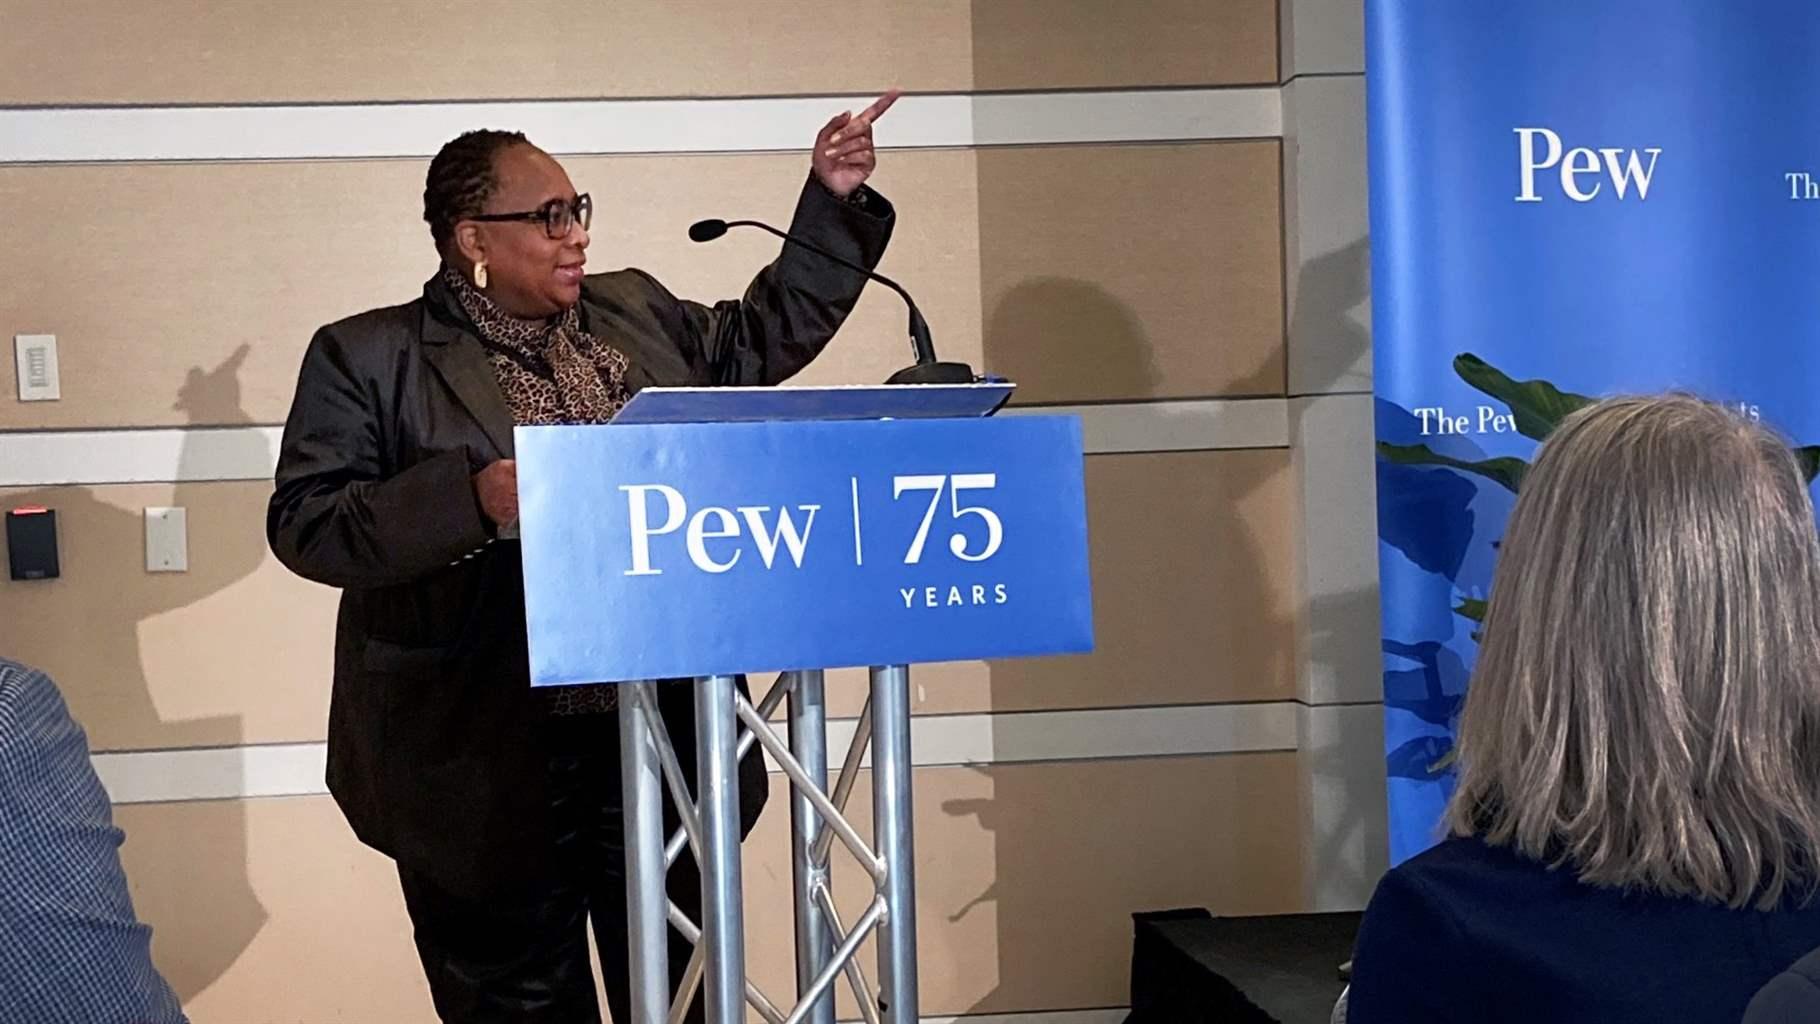 Donna Frisby-Greenwood, wearing a dark pantsuit and a print blouse with a scarf, stands behind a podium with a blue sign in front that reads, in white text: “Pew | 75 years.”